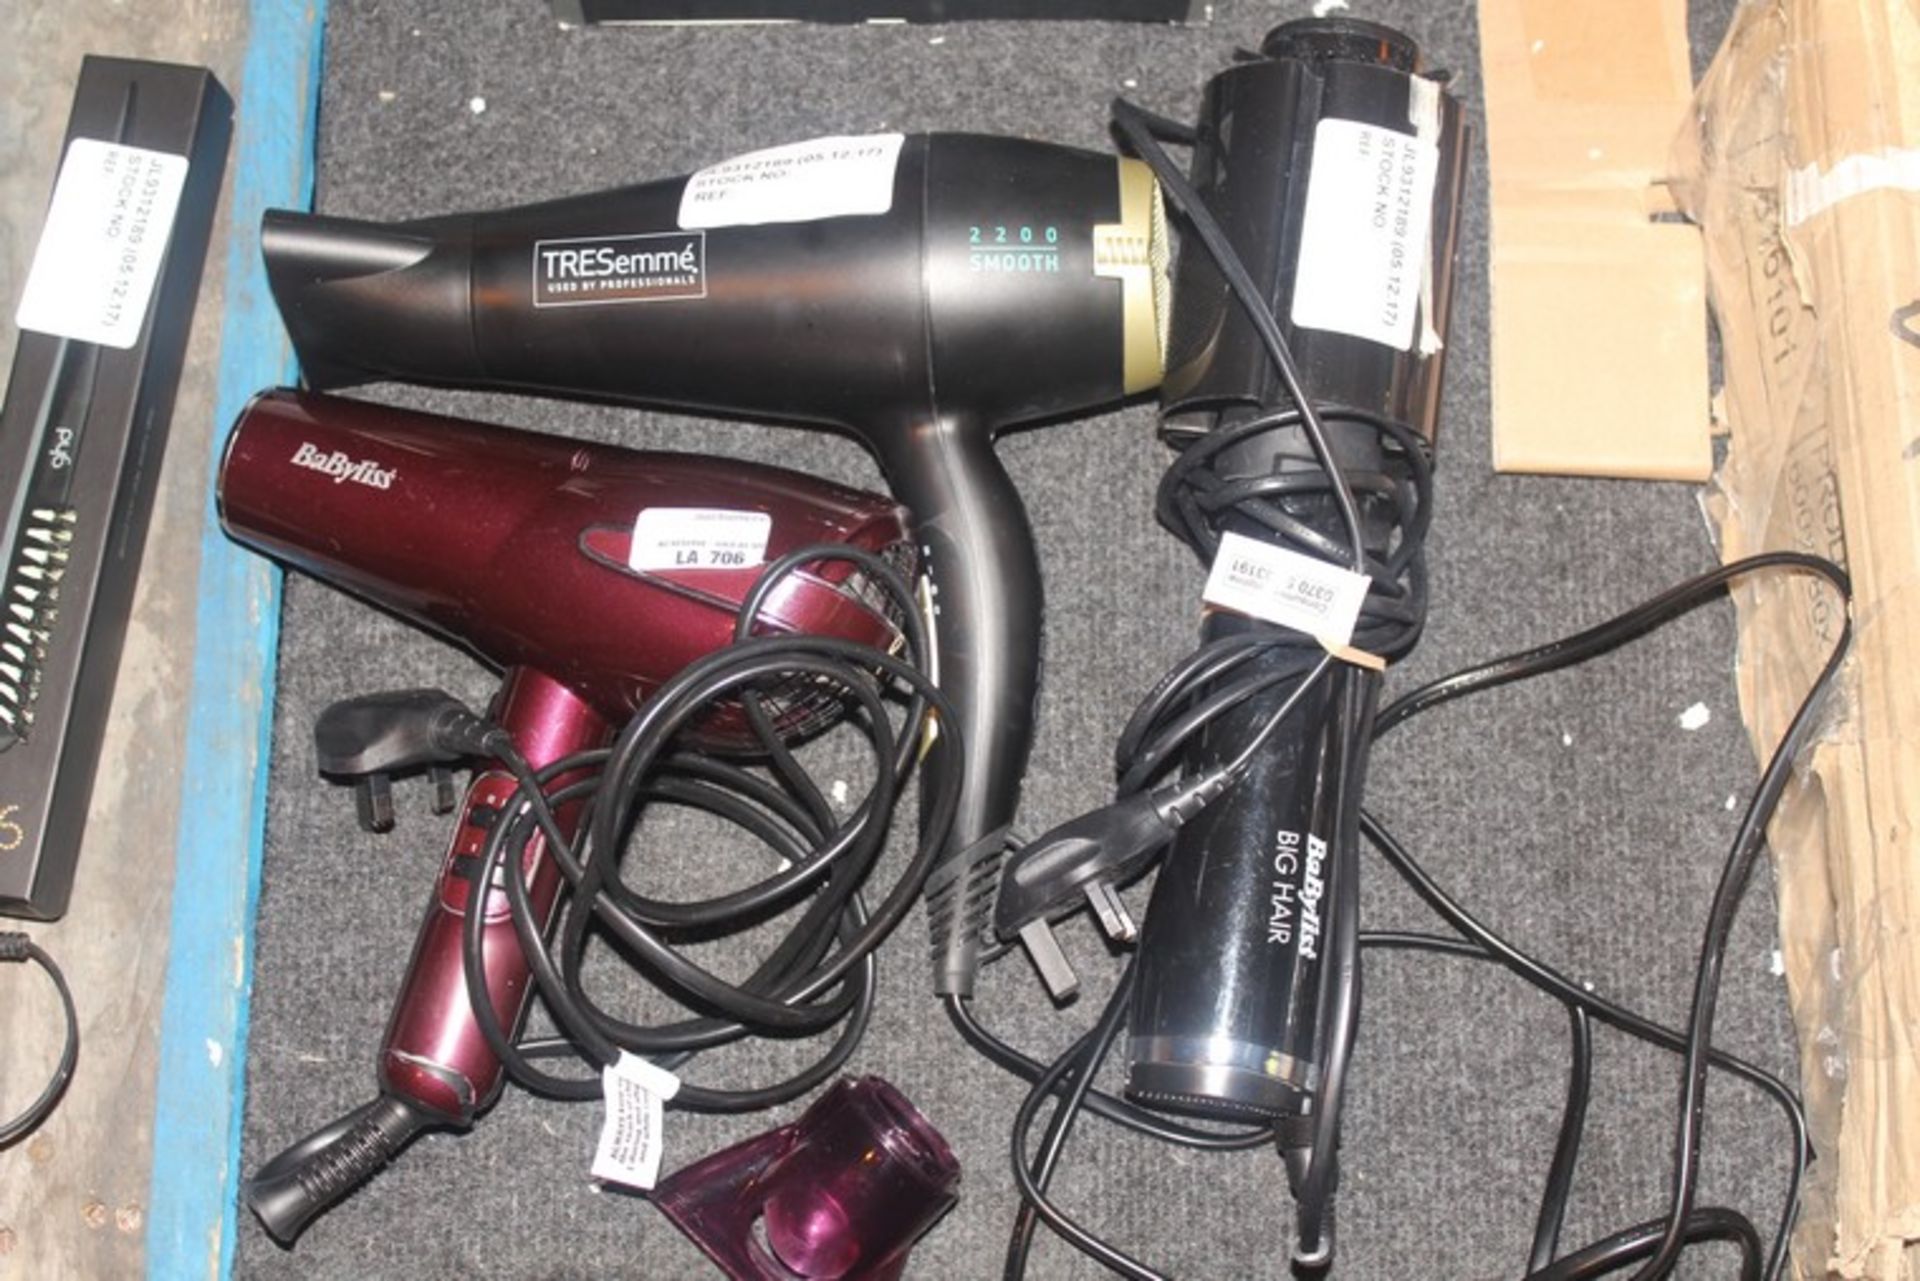 3 x ASSORTED HAIR ACCESSORY ITEMS TO INCLUDE BABYLISS HAIR DRYERS, TRESEME HAIR DRYERS AND OTHER (